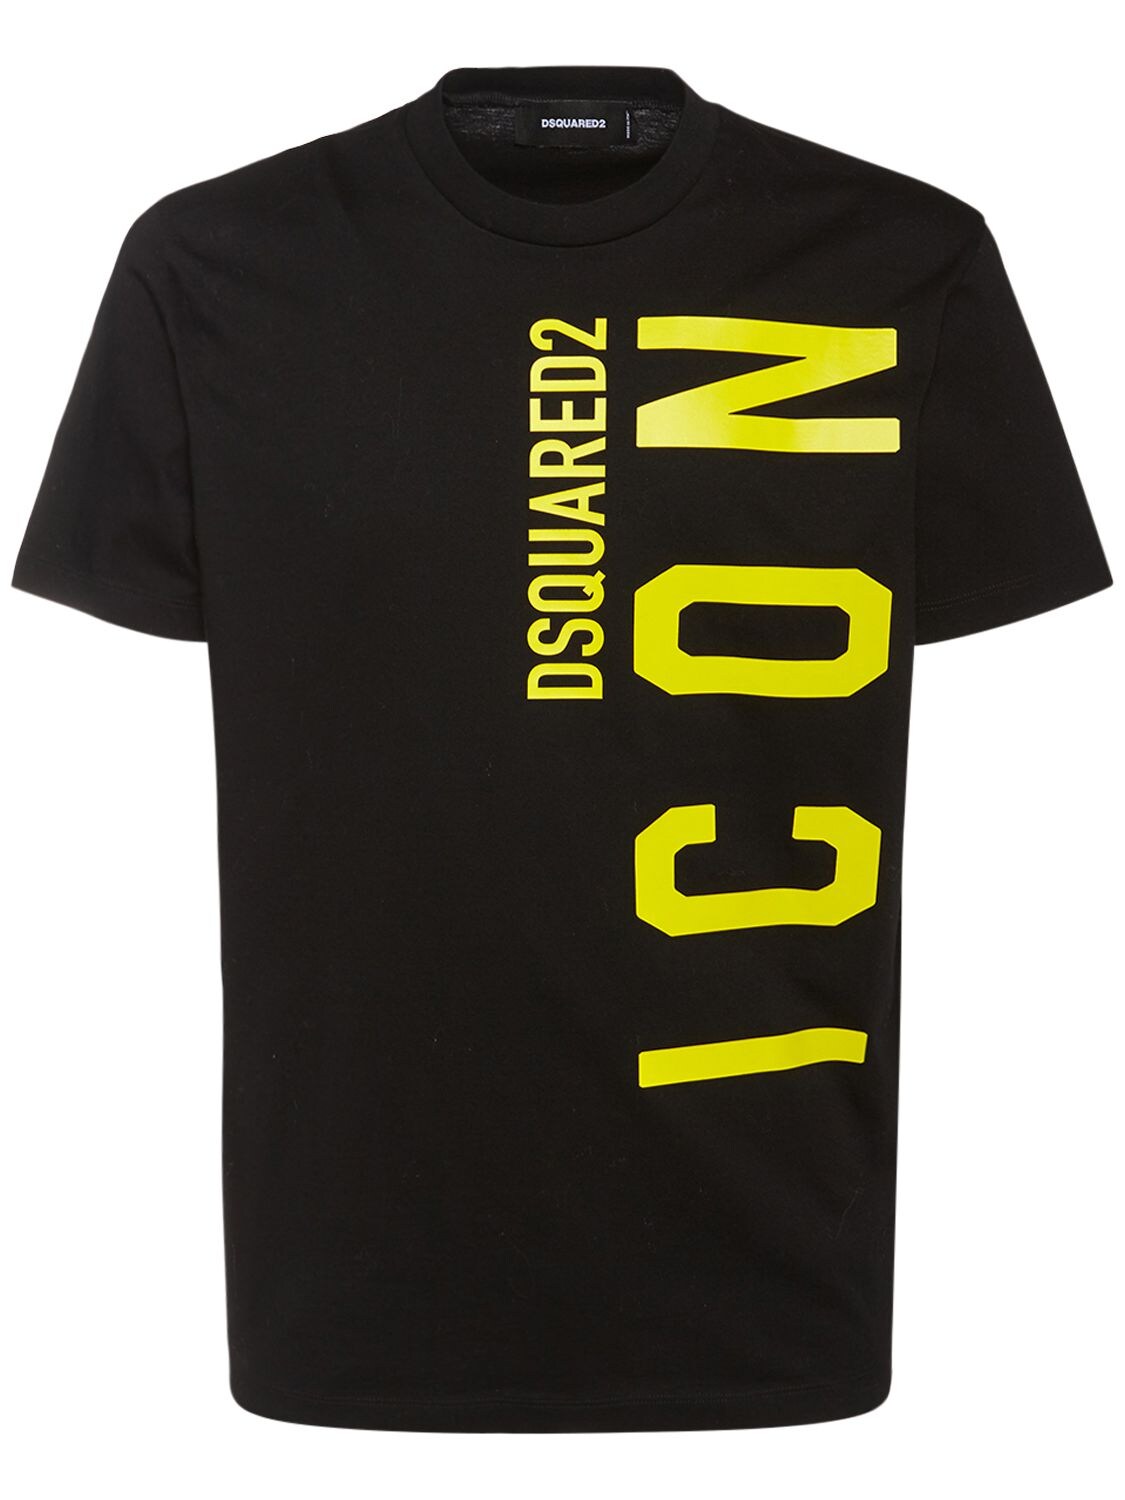 Dsquared2 - Vertical icon print jersey t-shirt - Black/Yellow ...